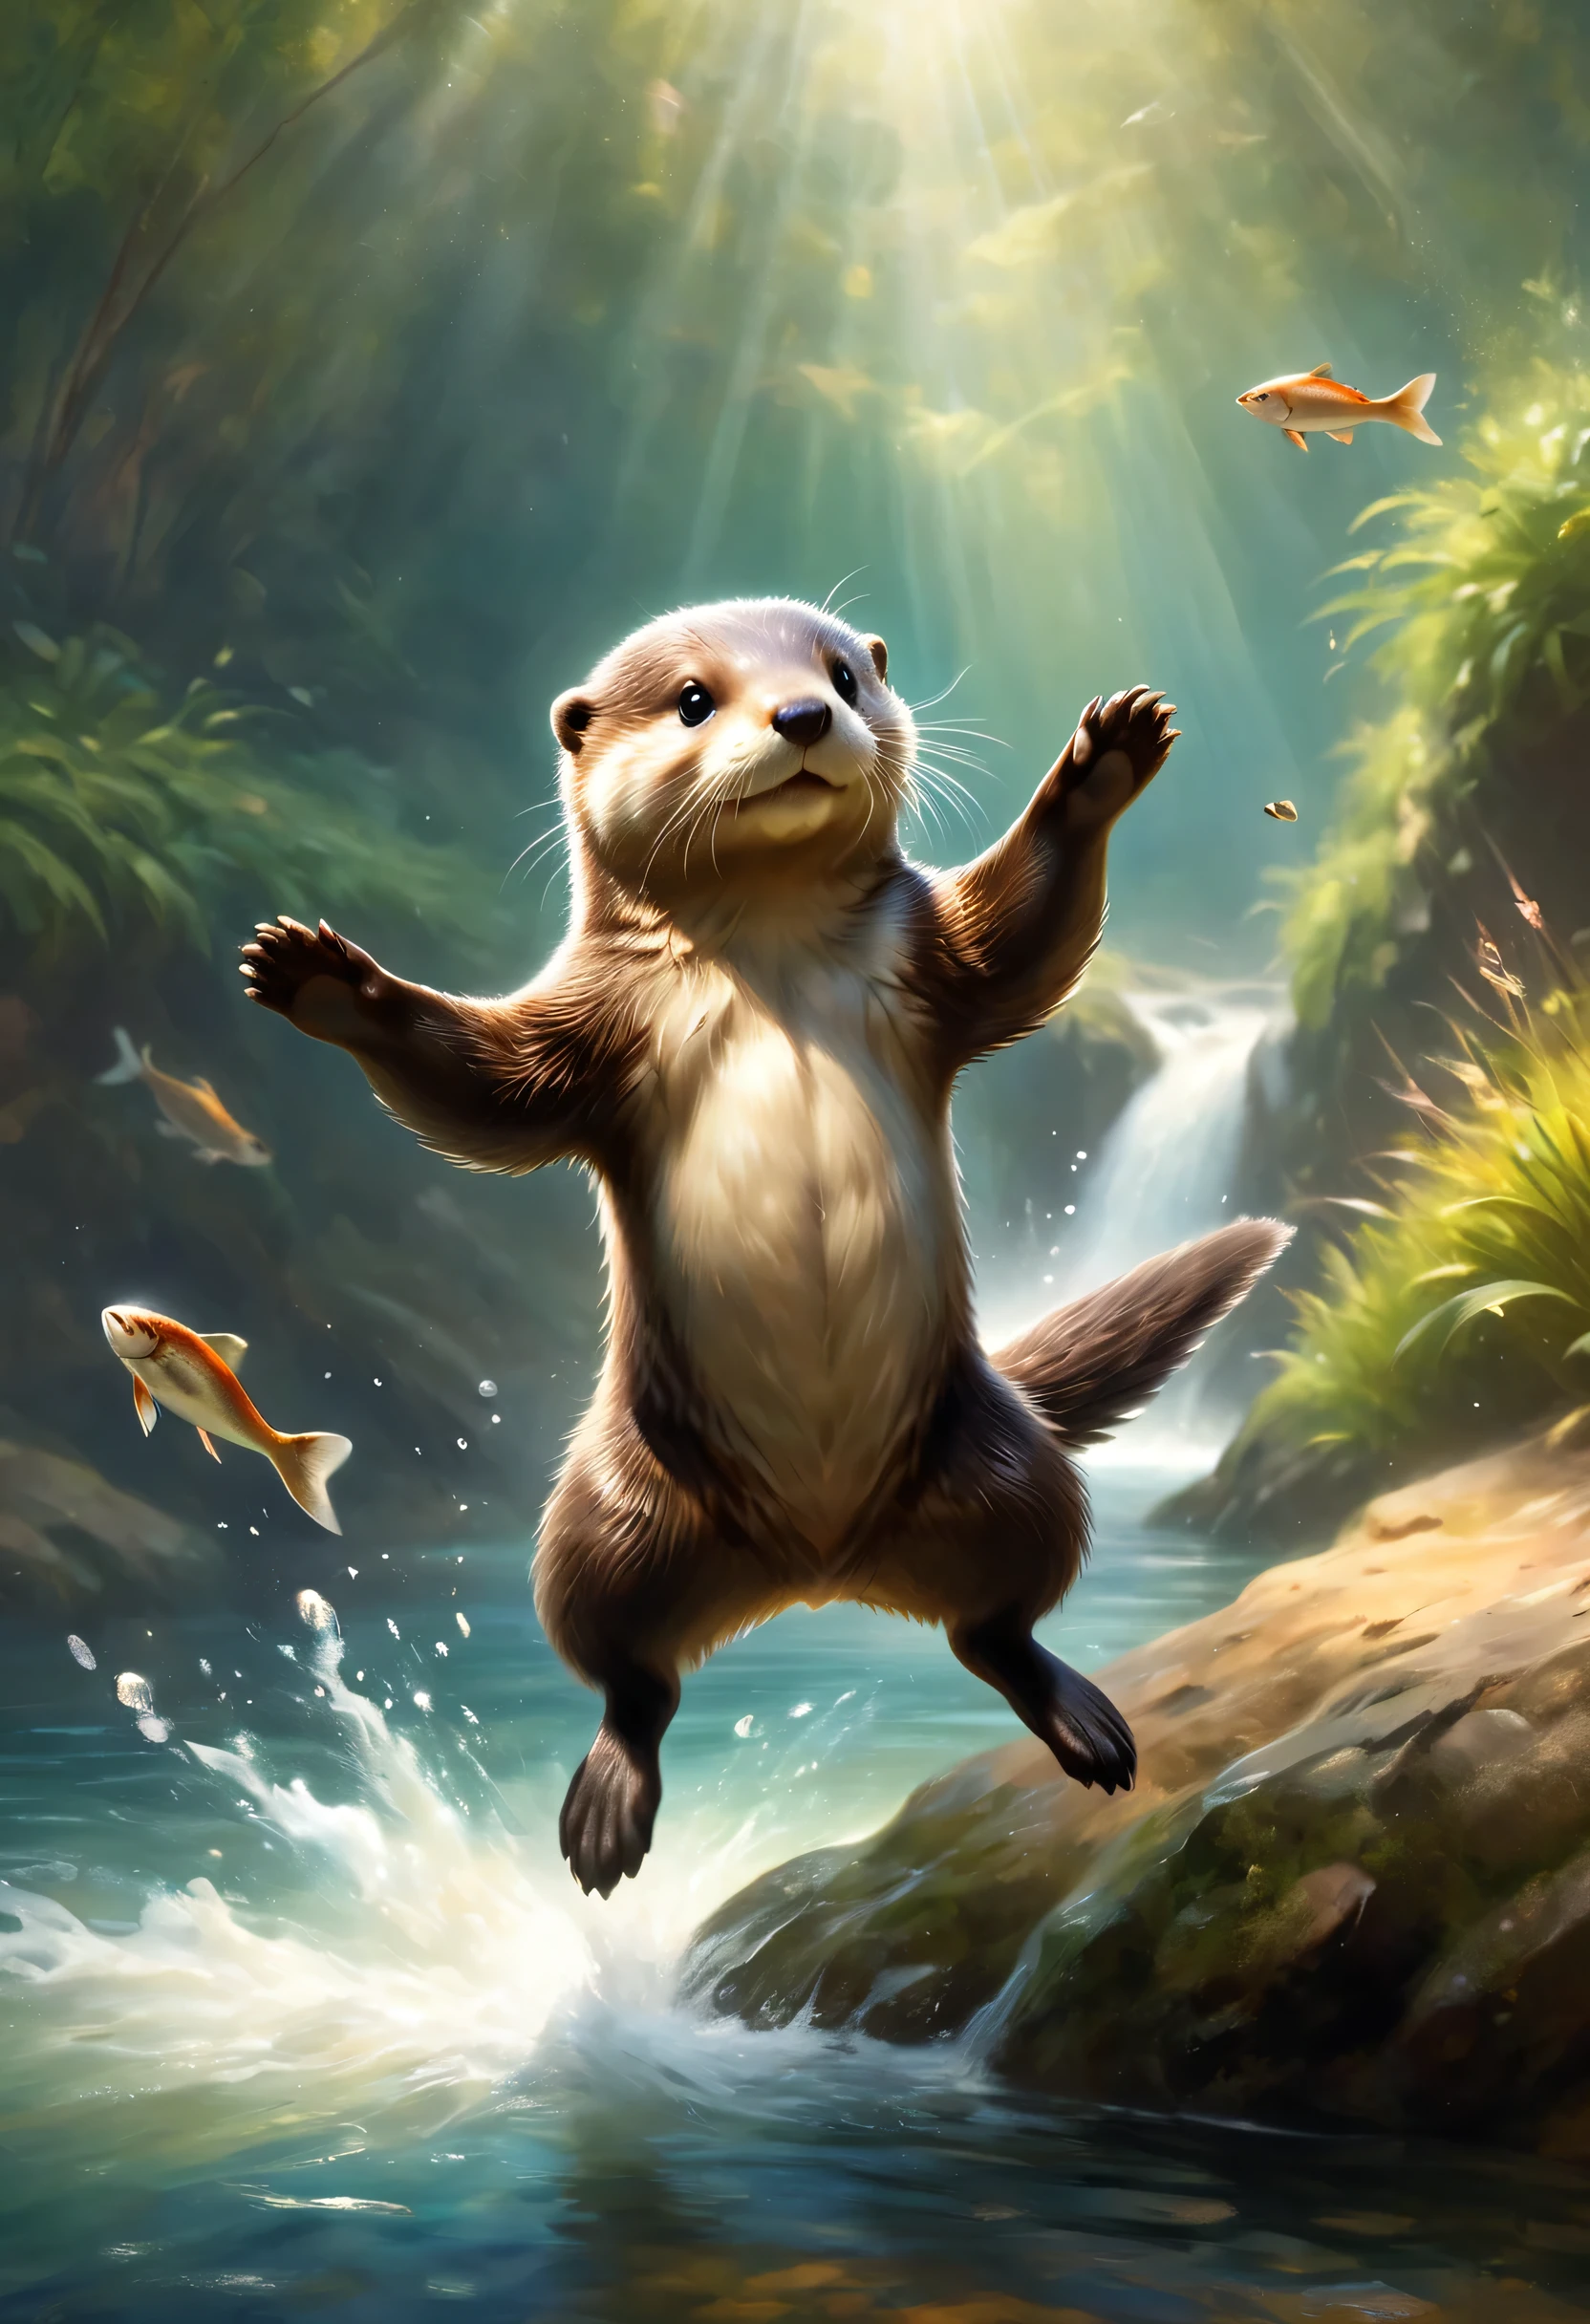 A cute otter greets the viewer, Pierre＝Art by Auguste Renoir and Jeremy Mann, (Viewpoint angle:1.2), Realistic, Ray Tracing, Beautiful lighting,masterpiece,river,Jump,Otter dancing for joy,smile,Raise your hand,Splash,Sparkling,reflection